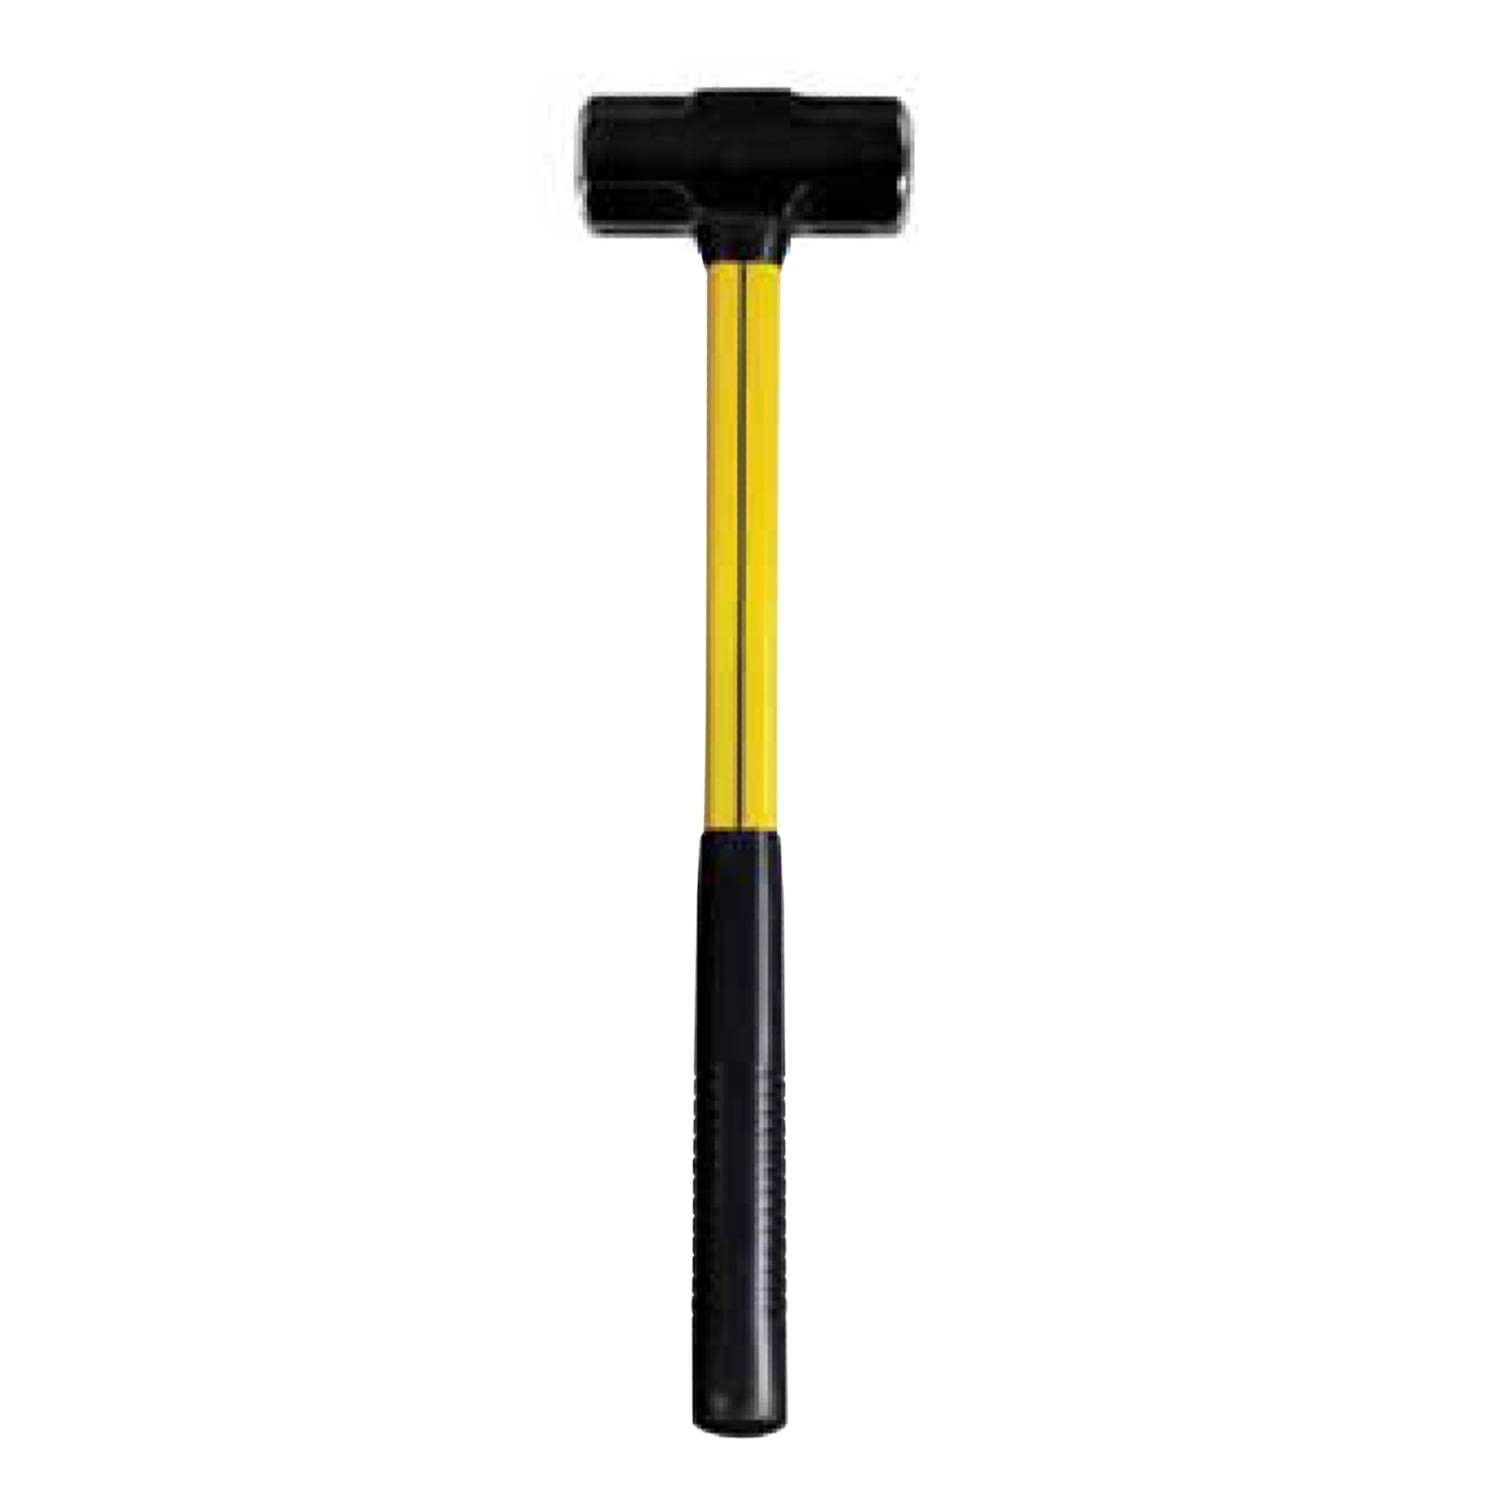 Picture of Nupla 7023957 Classic 4 lb Steel Double-Faced Sledge Hammer with 15 in. Fiberglass Handle